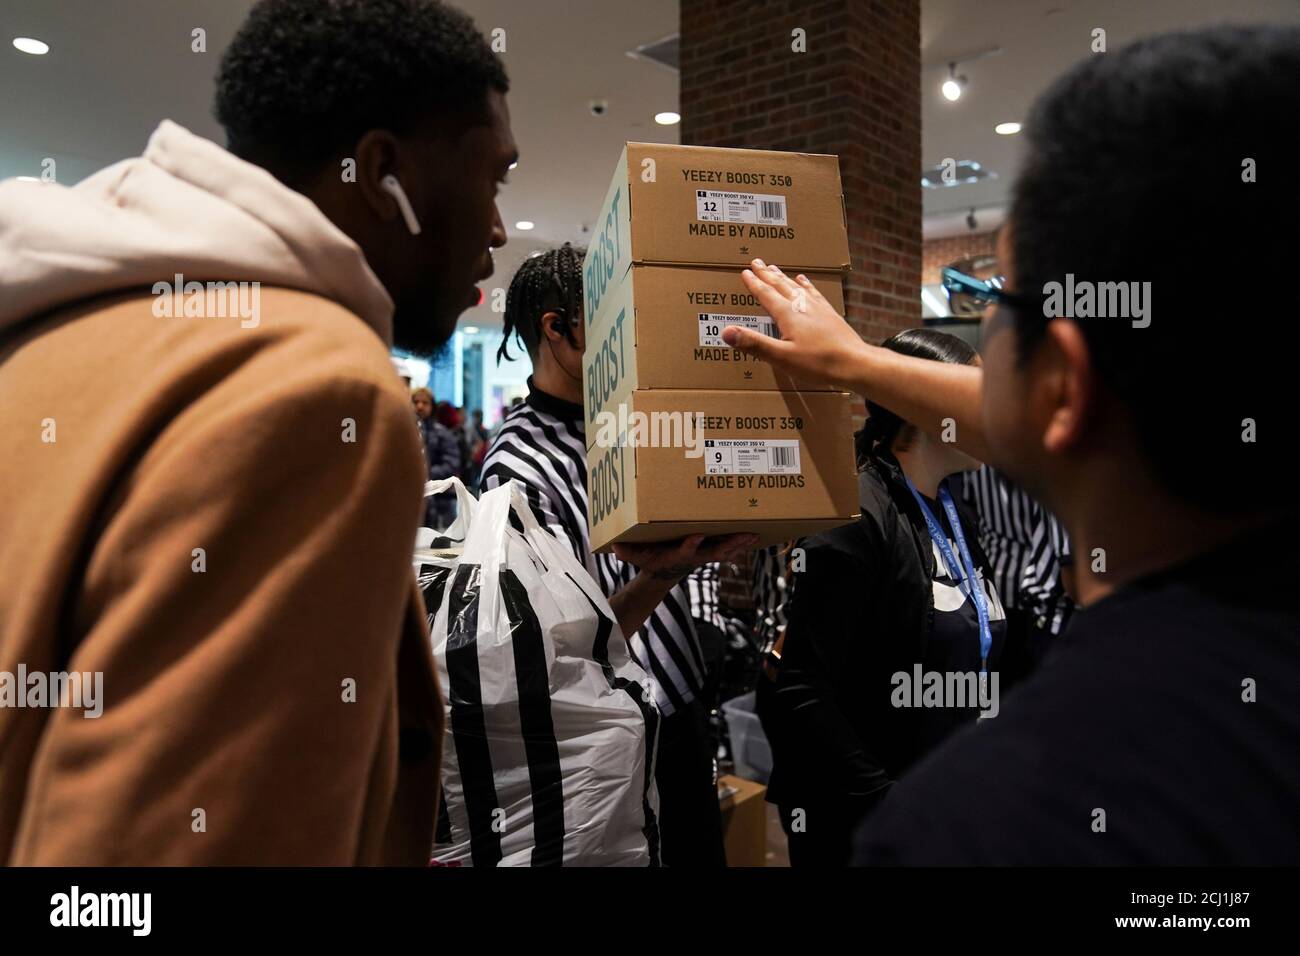 A Foot Locker employee retrieves boxes of Kanye West's Yeezy shoes in King  of Prussia mall on Black Friday, a day that kicks off the holiday shopping  season, in King of Prussia,